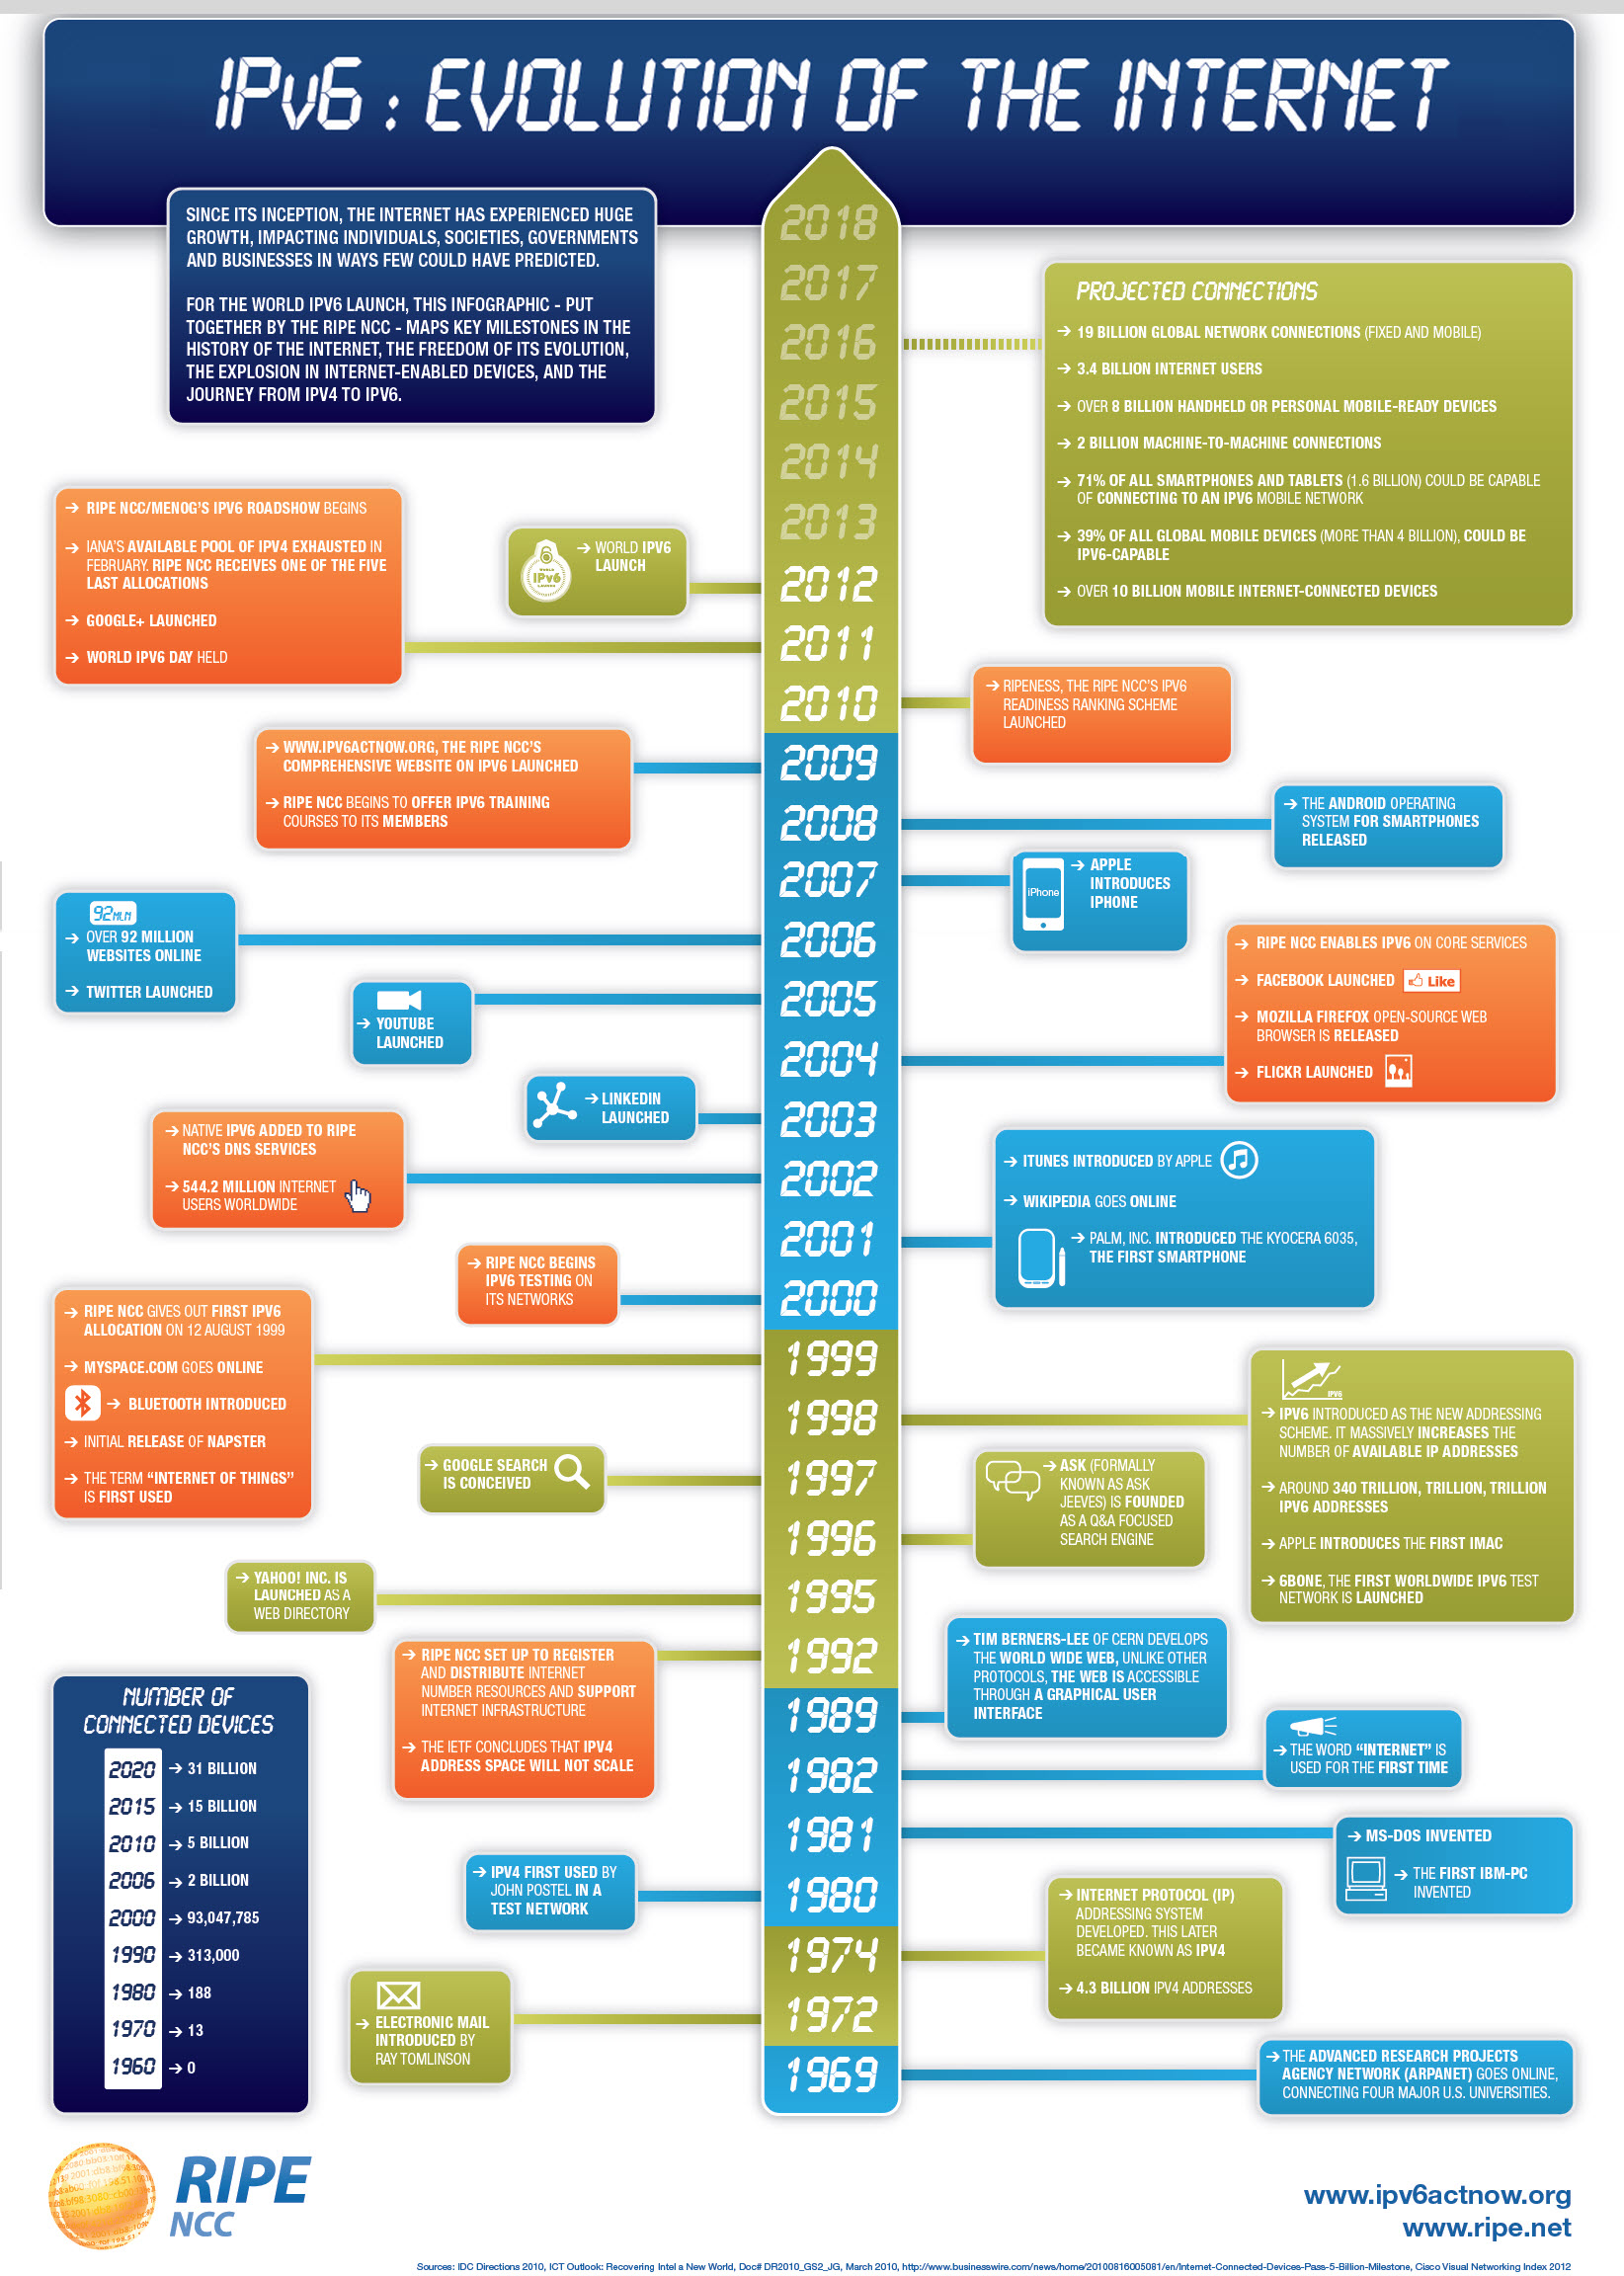 BJ's nocabbages: The Evolution of the Internet